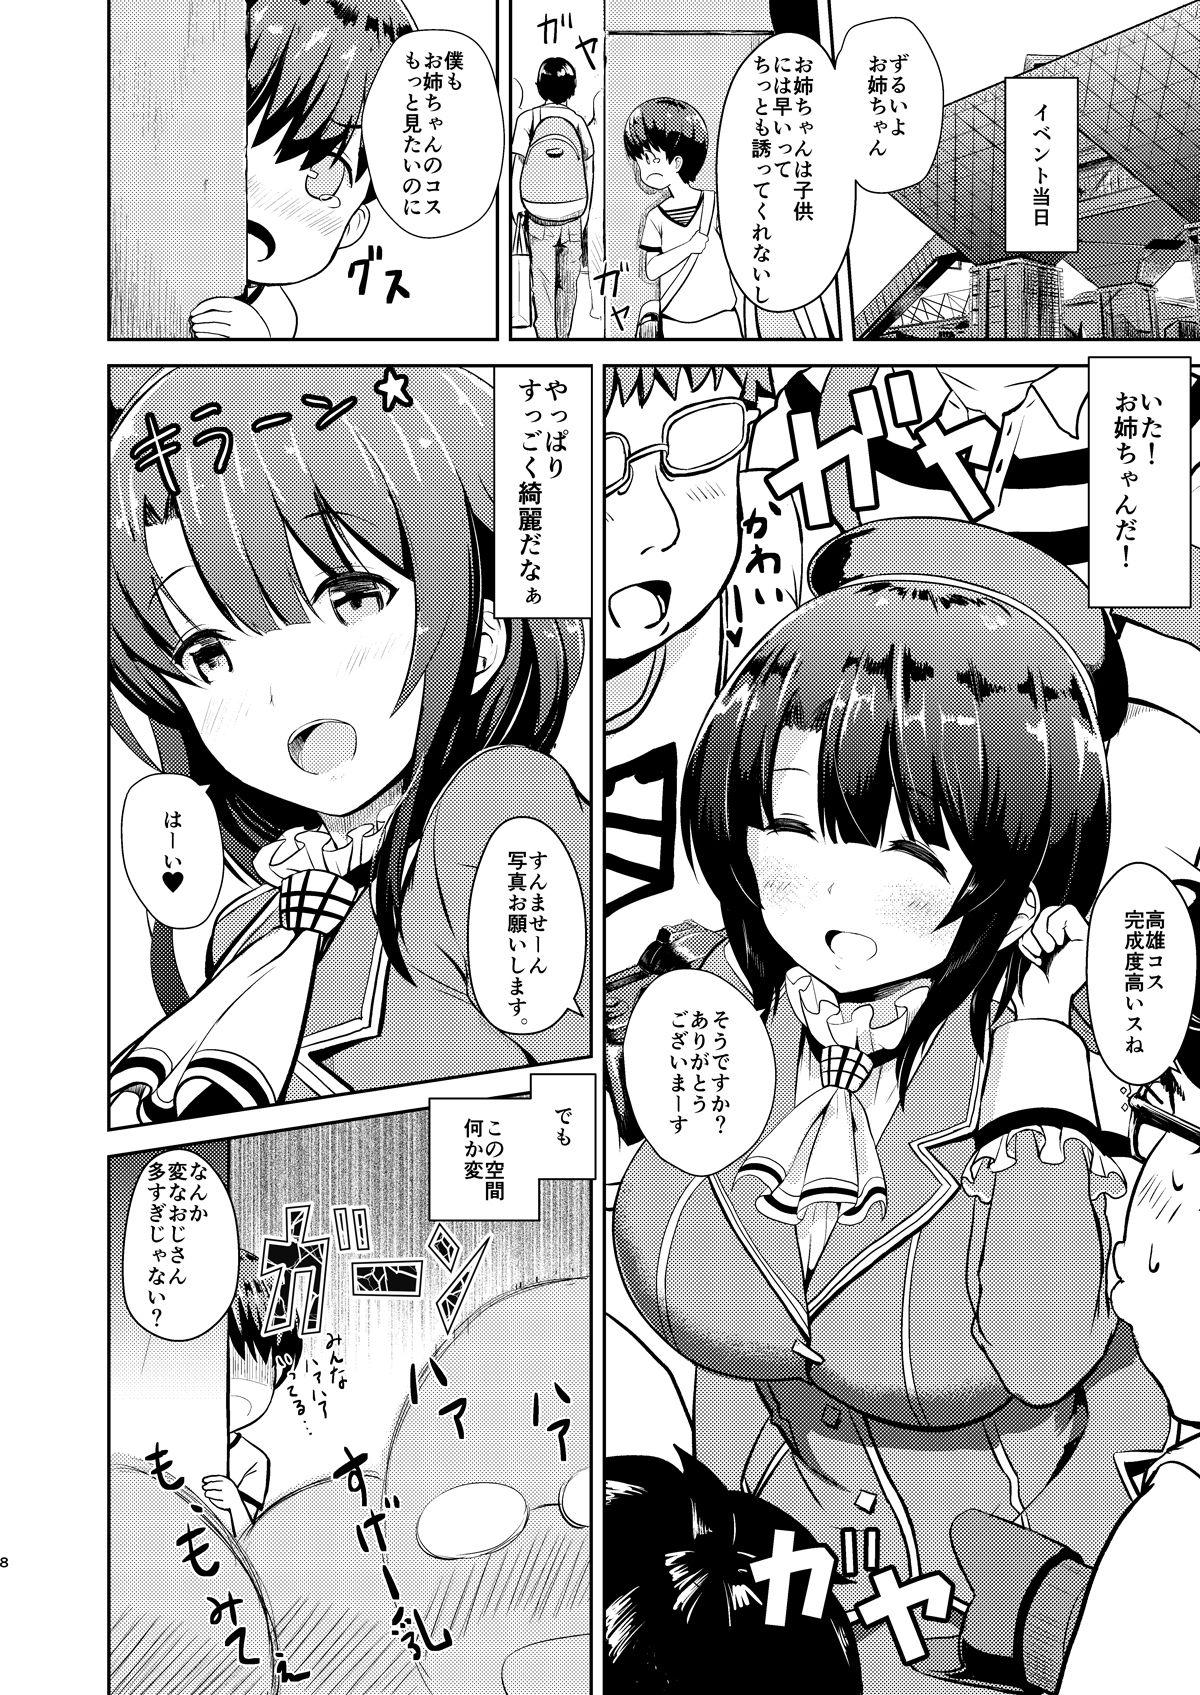 Music Takao-ppoi Ane - Kantai collection Picked Up - Page 7